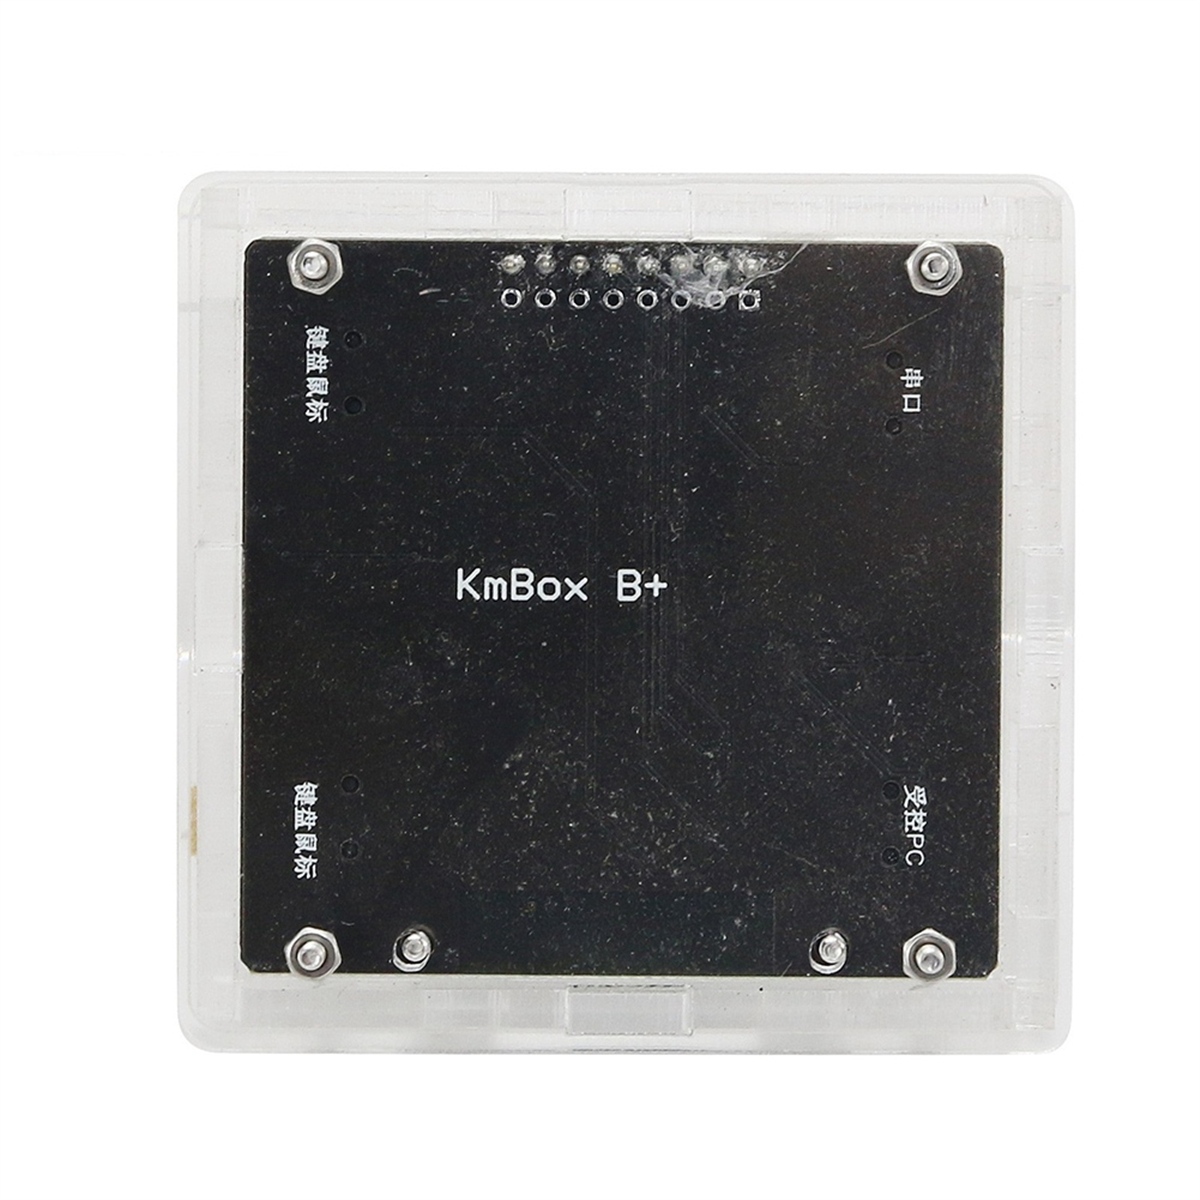 Kmbox B+Pro Key Mouse Controller AI Auxiliary,NO LCD - Walmart.com